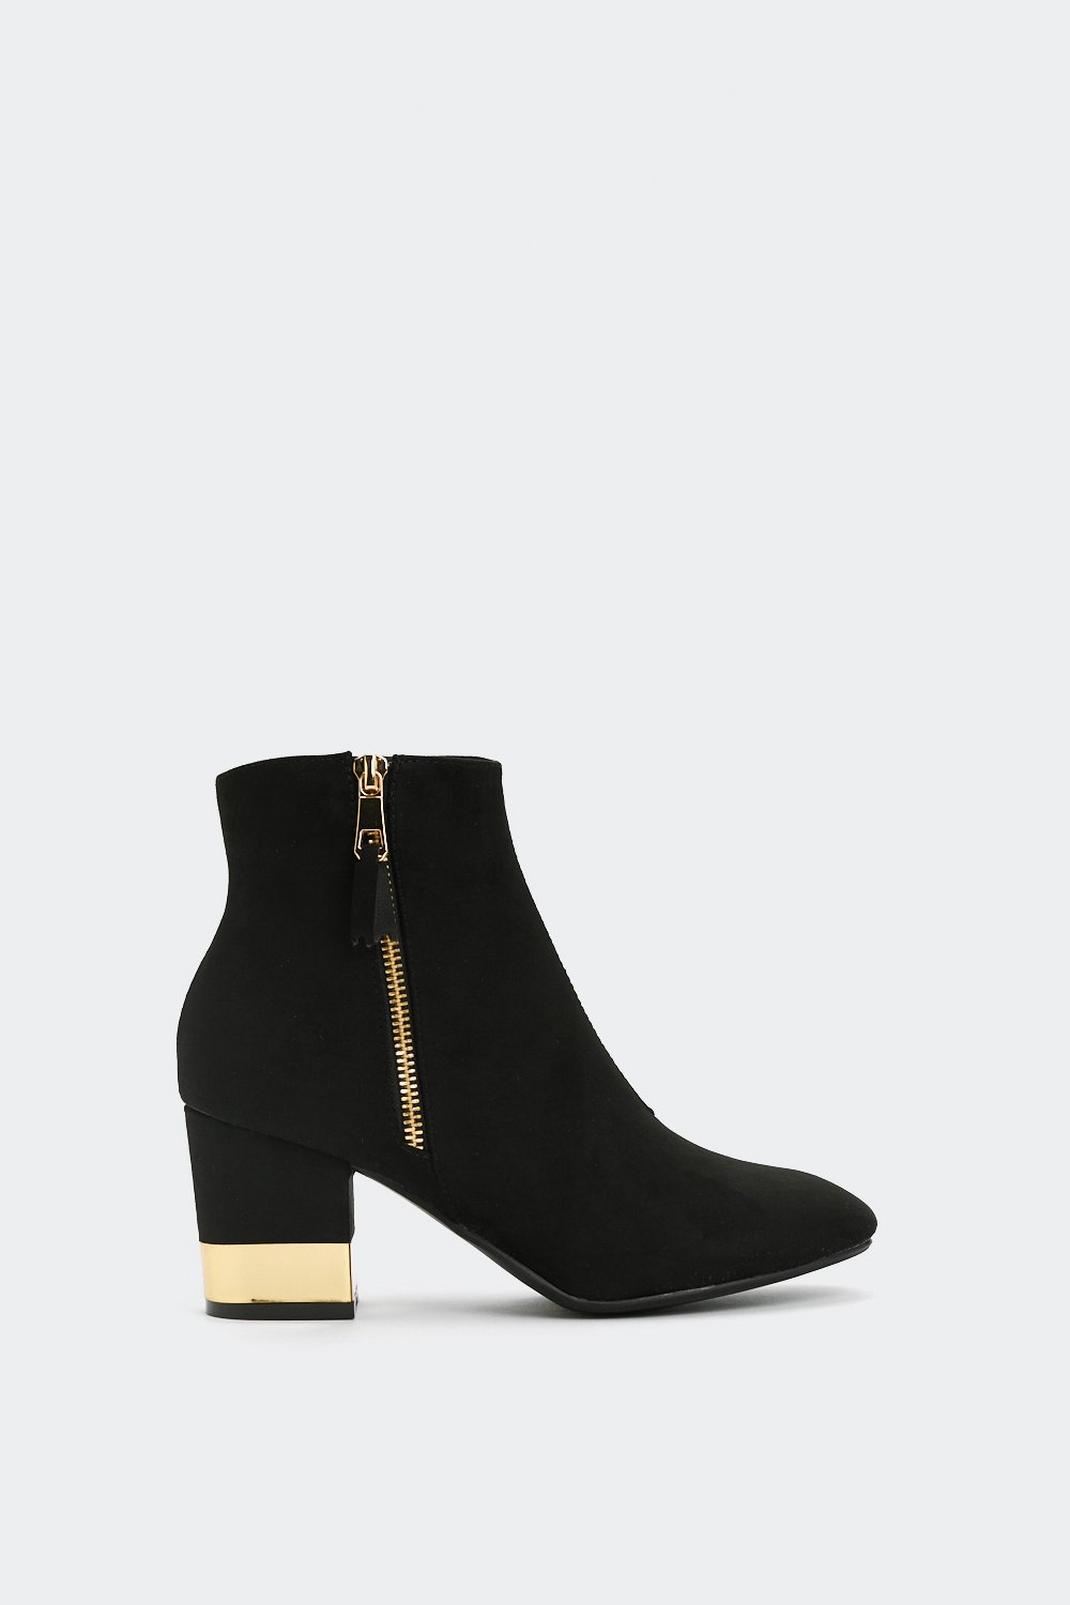 Making Money Moves Ankle Boot | Nasty Gal